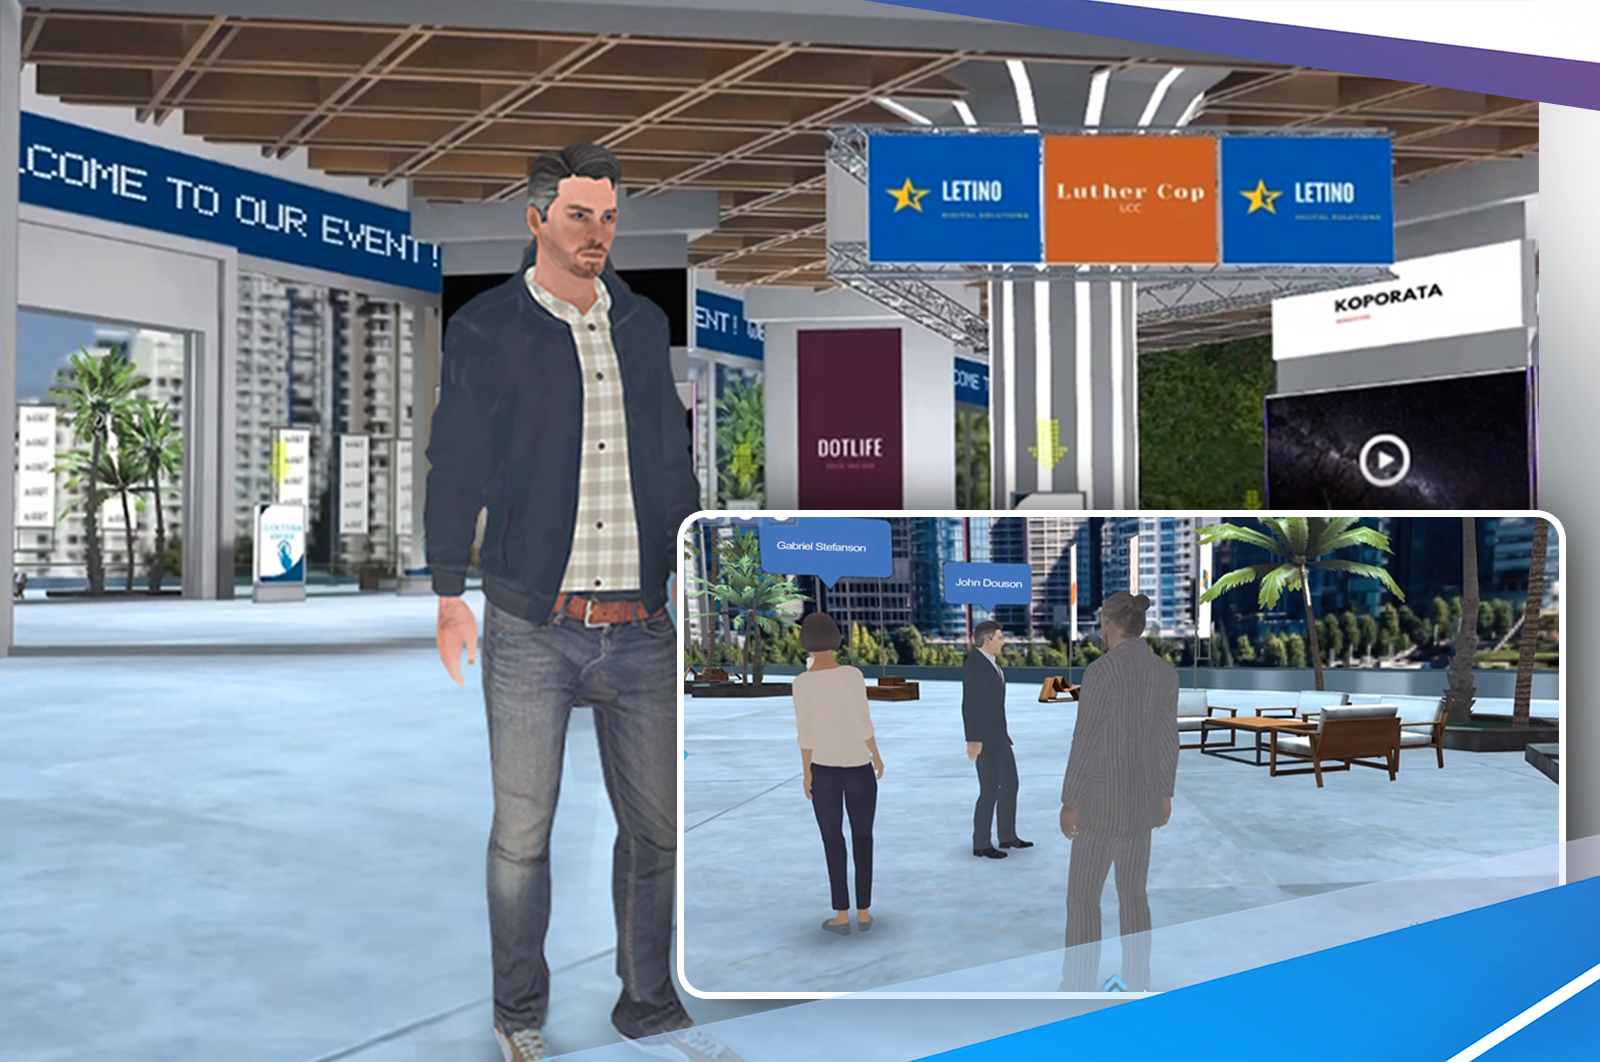 360 degree Event Hall with banners, videos, presentations and other avatars